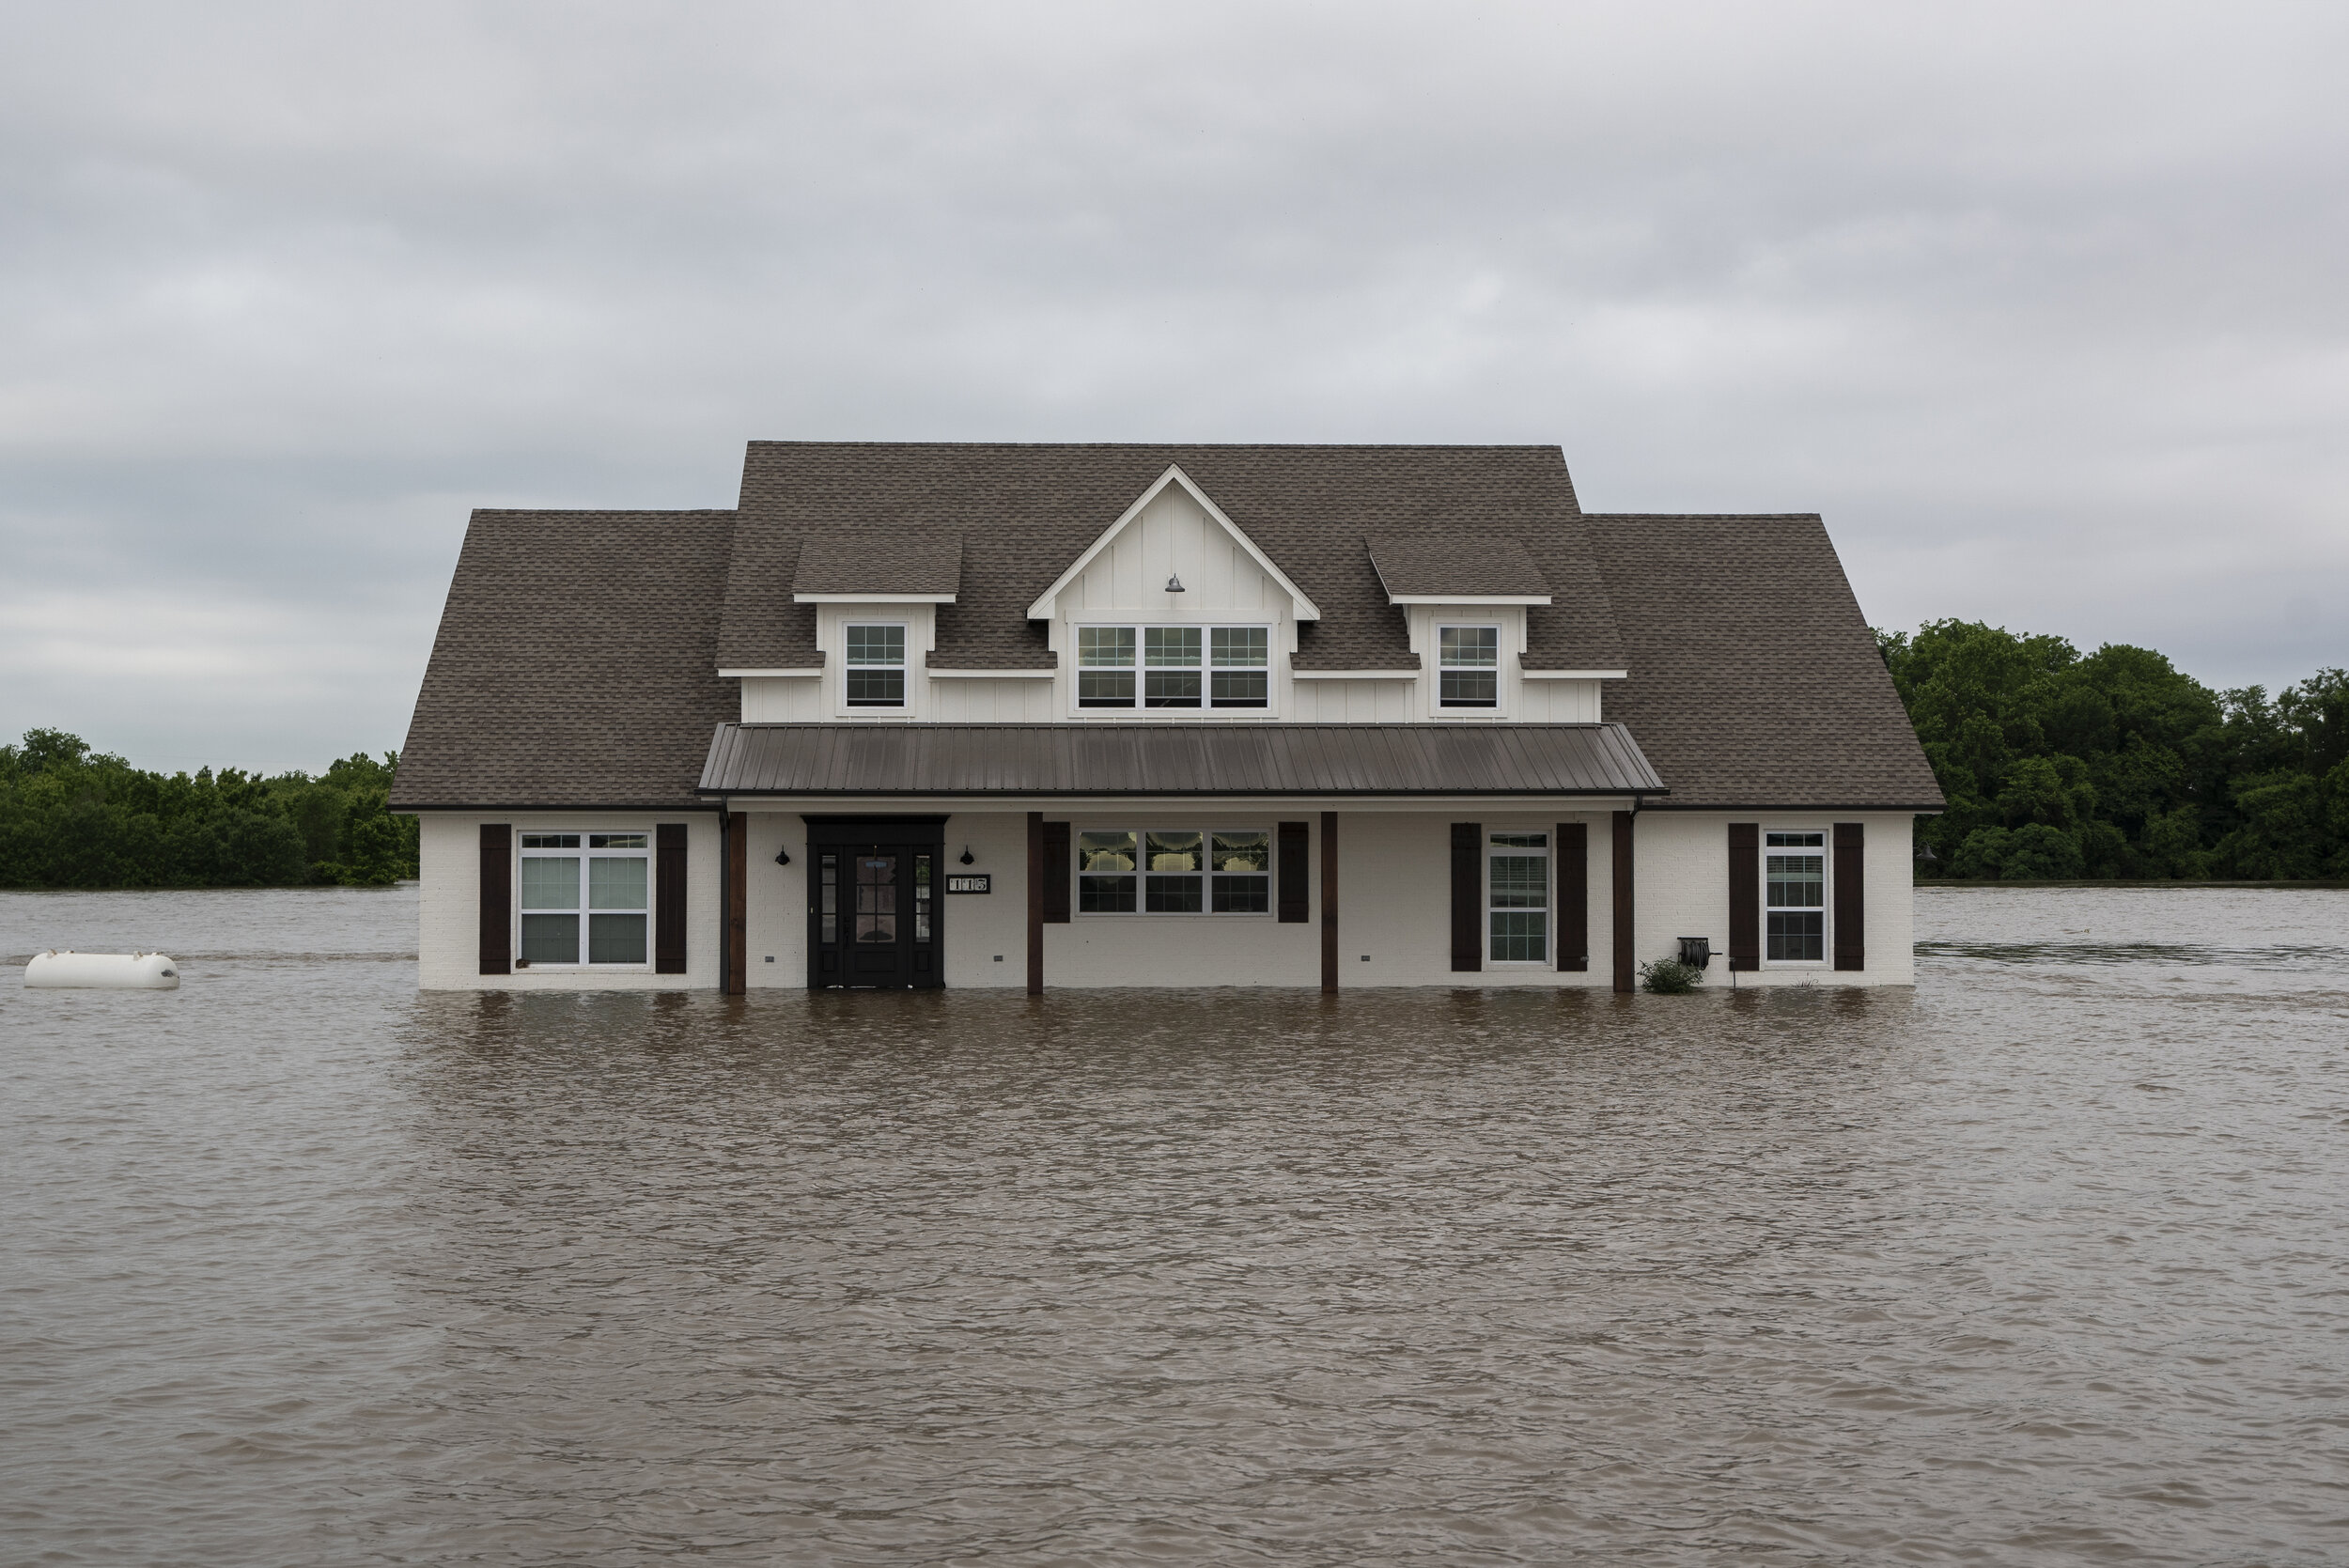  Floodwater from the Arkansas River surrounds a home in Fort Gibson, Oklahoma on May 26, 2019. CREDIT: Nick Oxford for The New York Times 